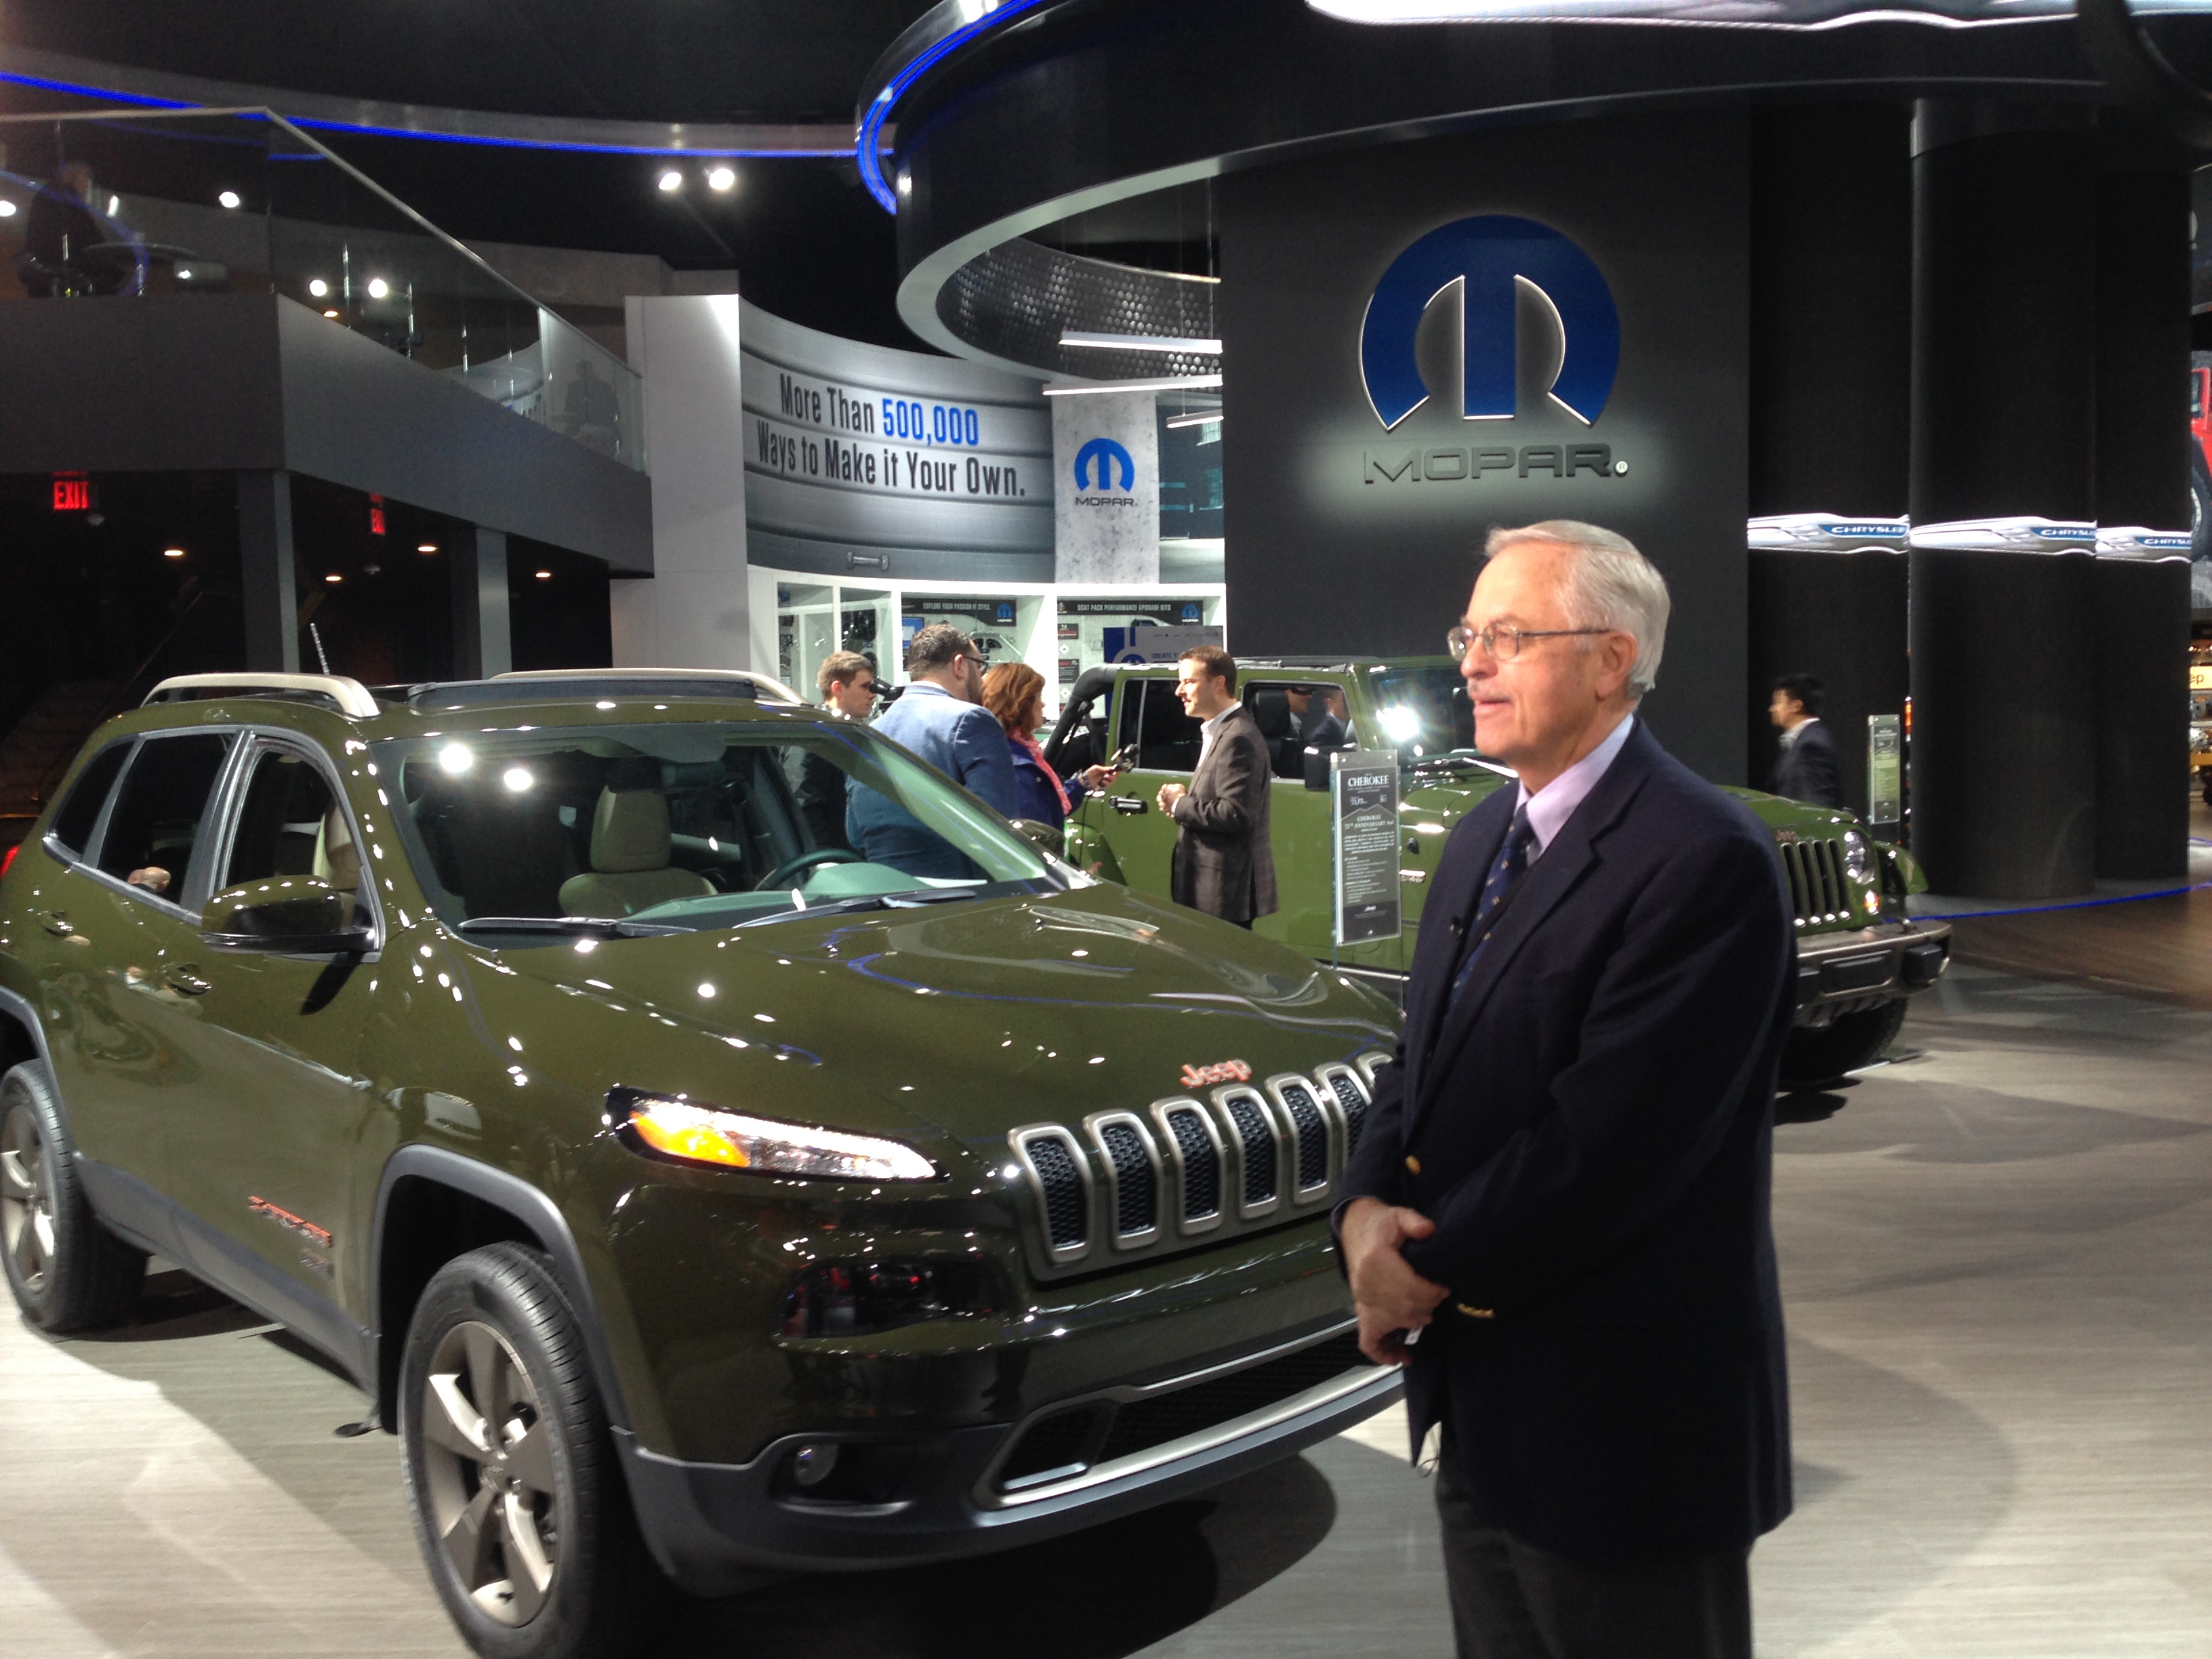 David Cole, founder and chair of AutoHarvest discusses the talent gap in the auto industry. (credit: CBS 62)